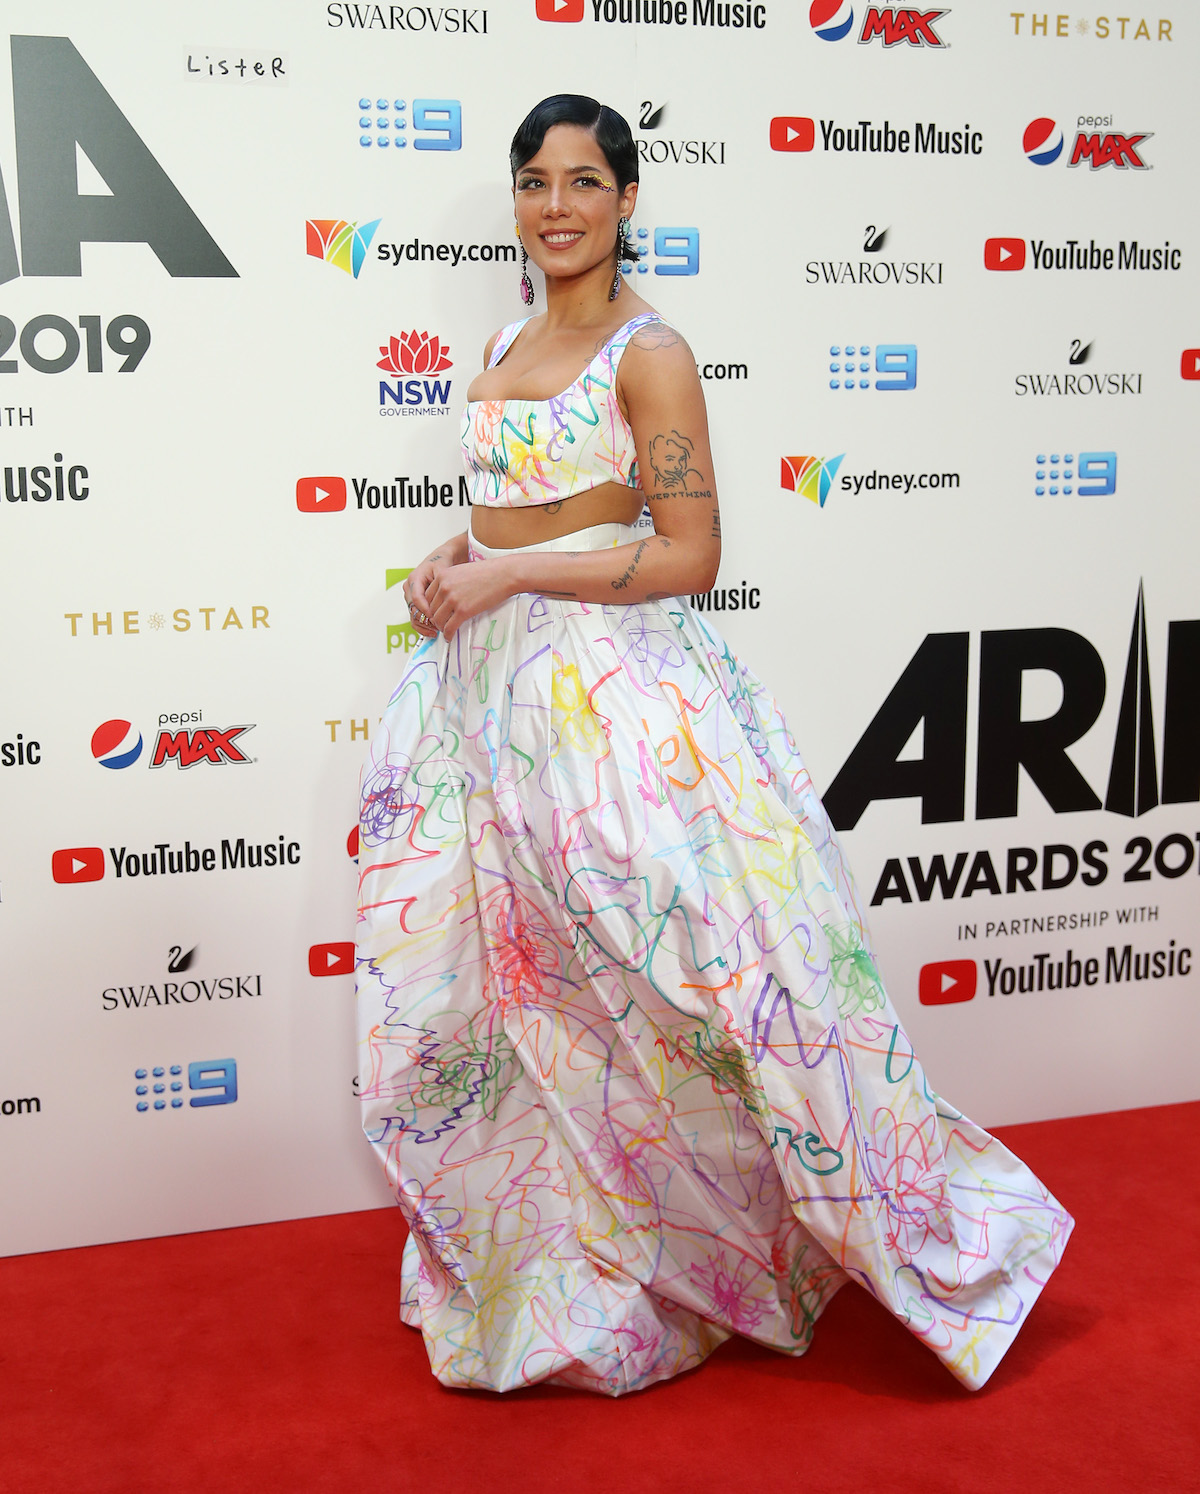 Halsey walks the red carpet in a long white gown covered in colorful designs.